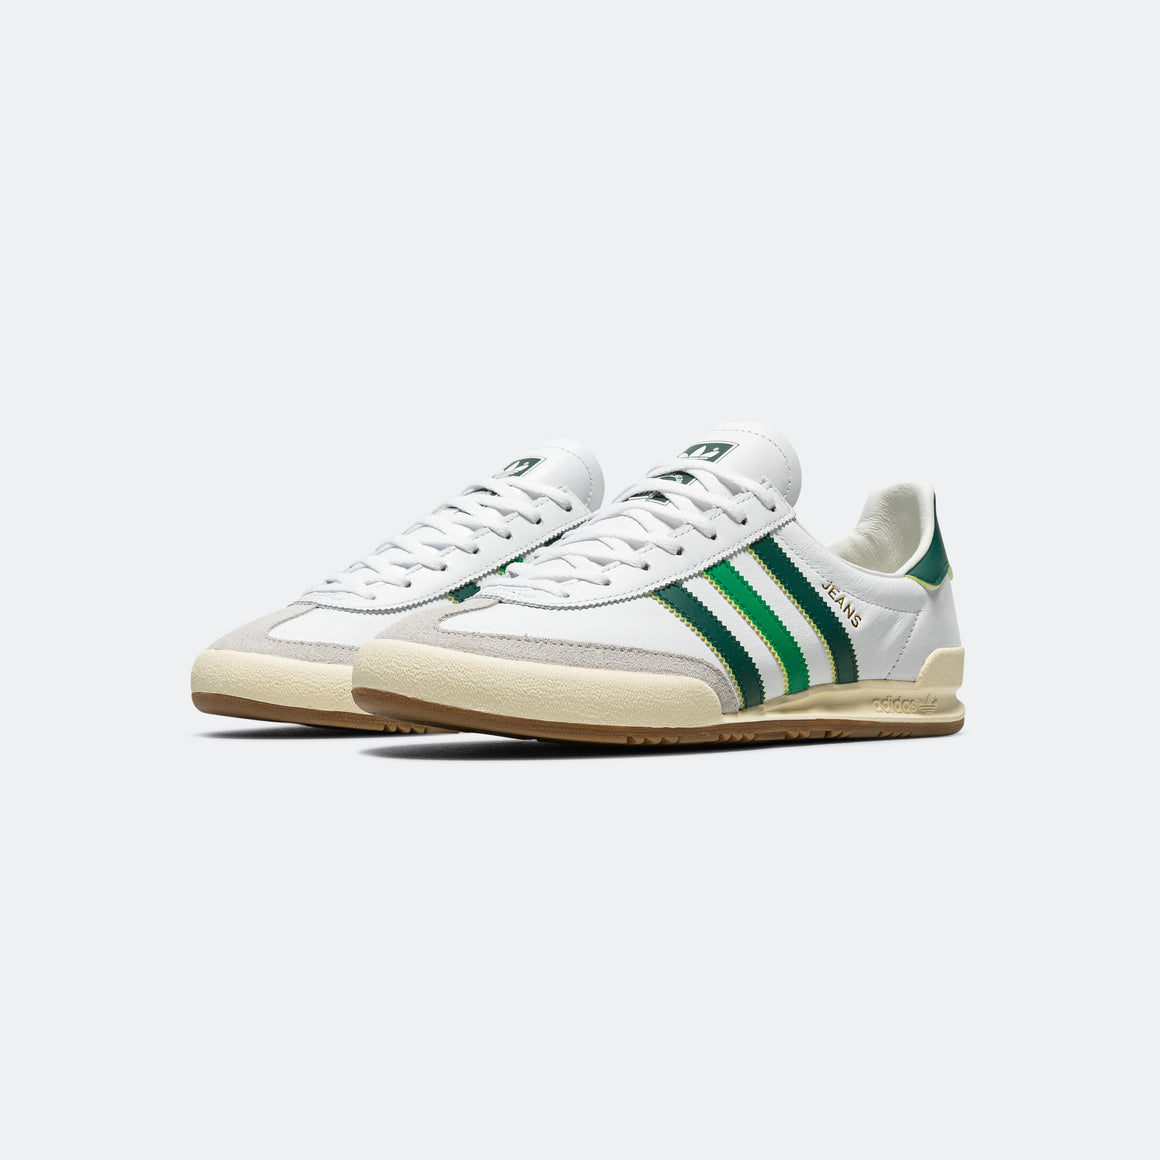 adidas - Jeans - Footwear White/Core Green-Crystal White - UP THERE